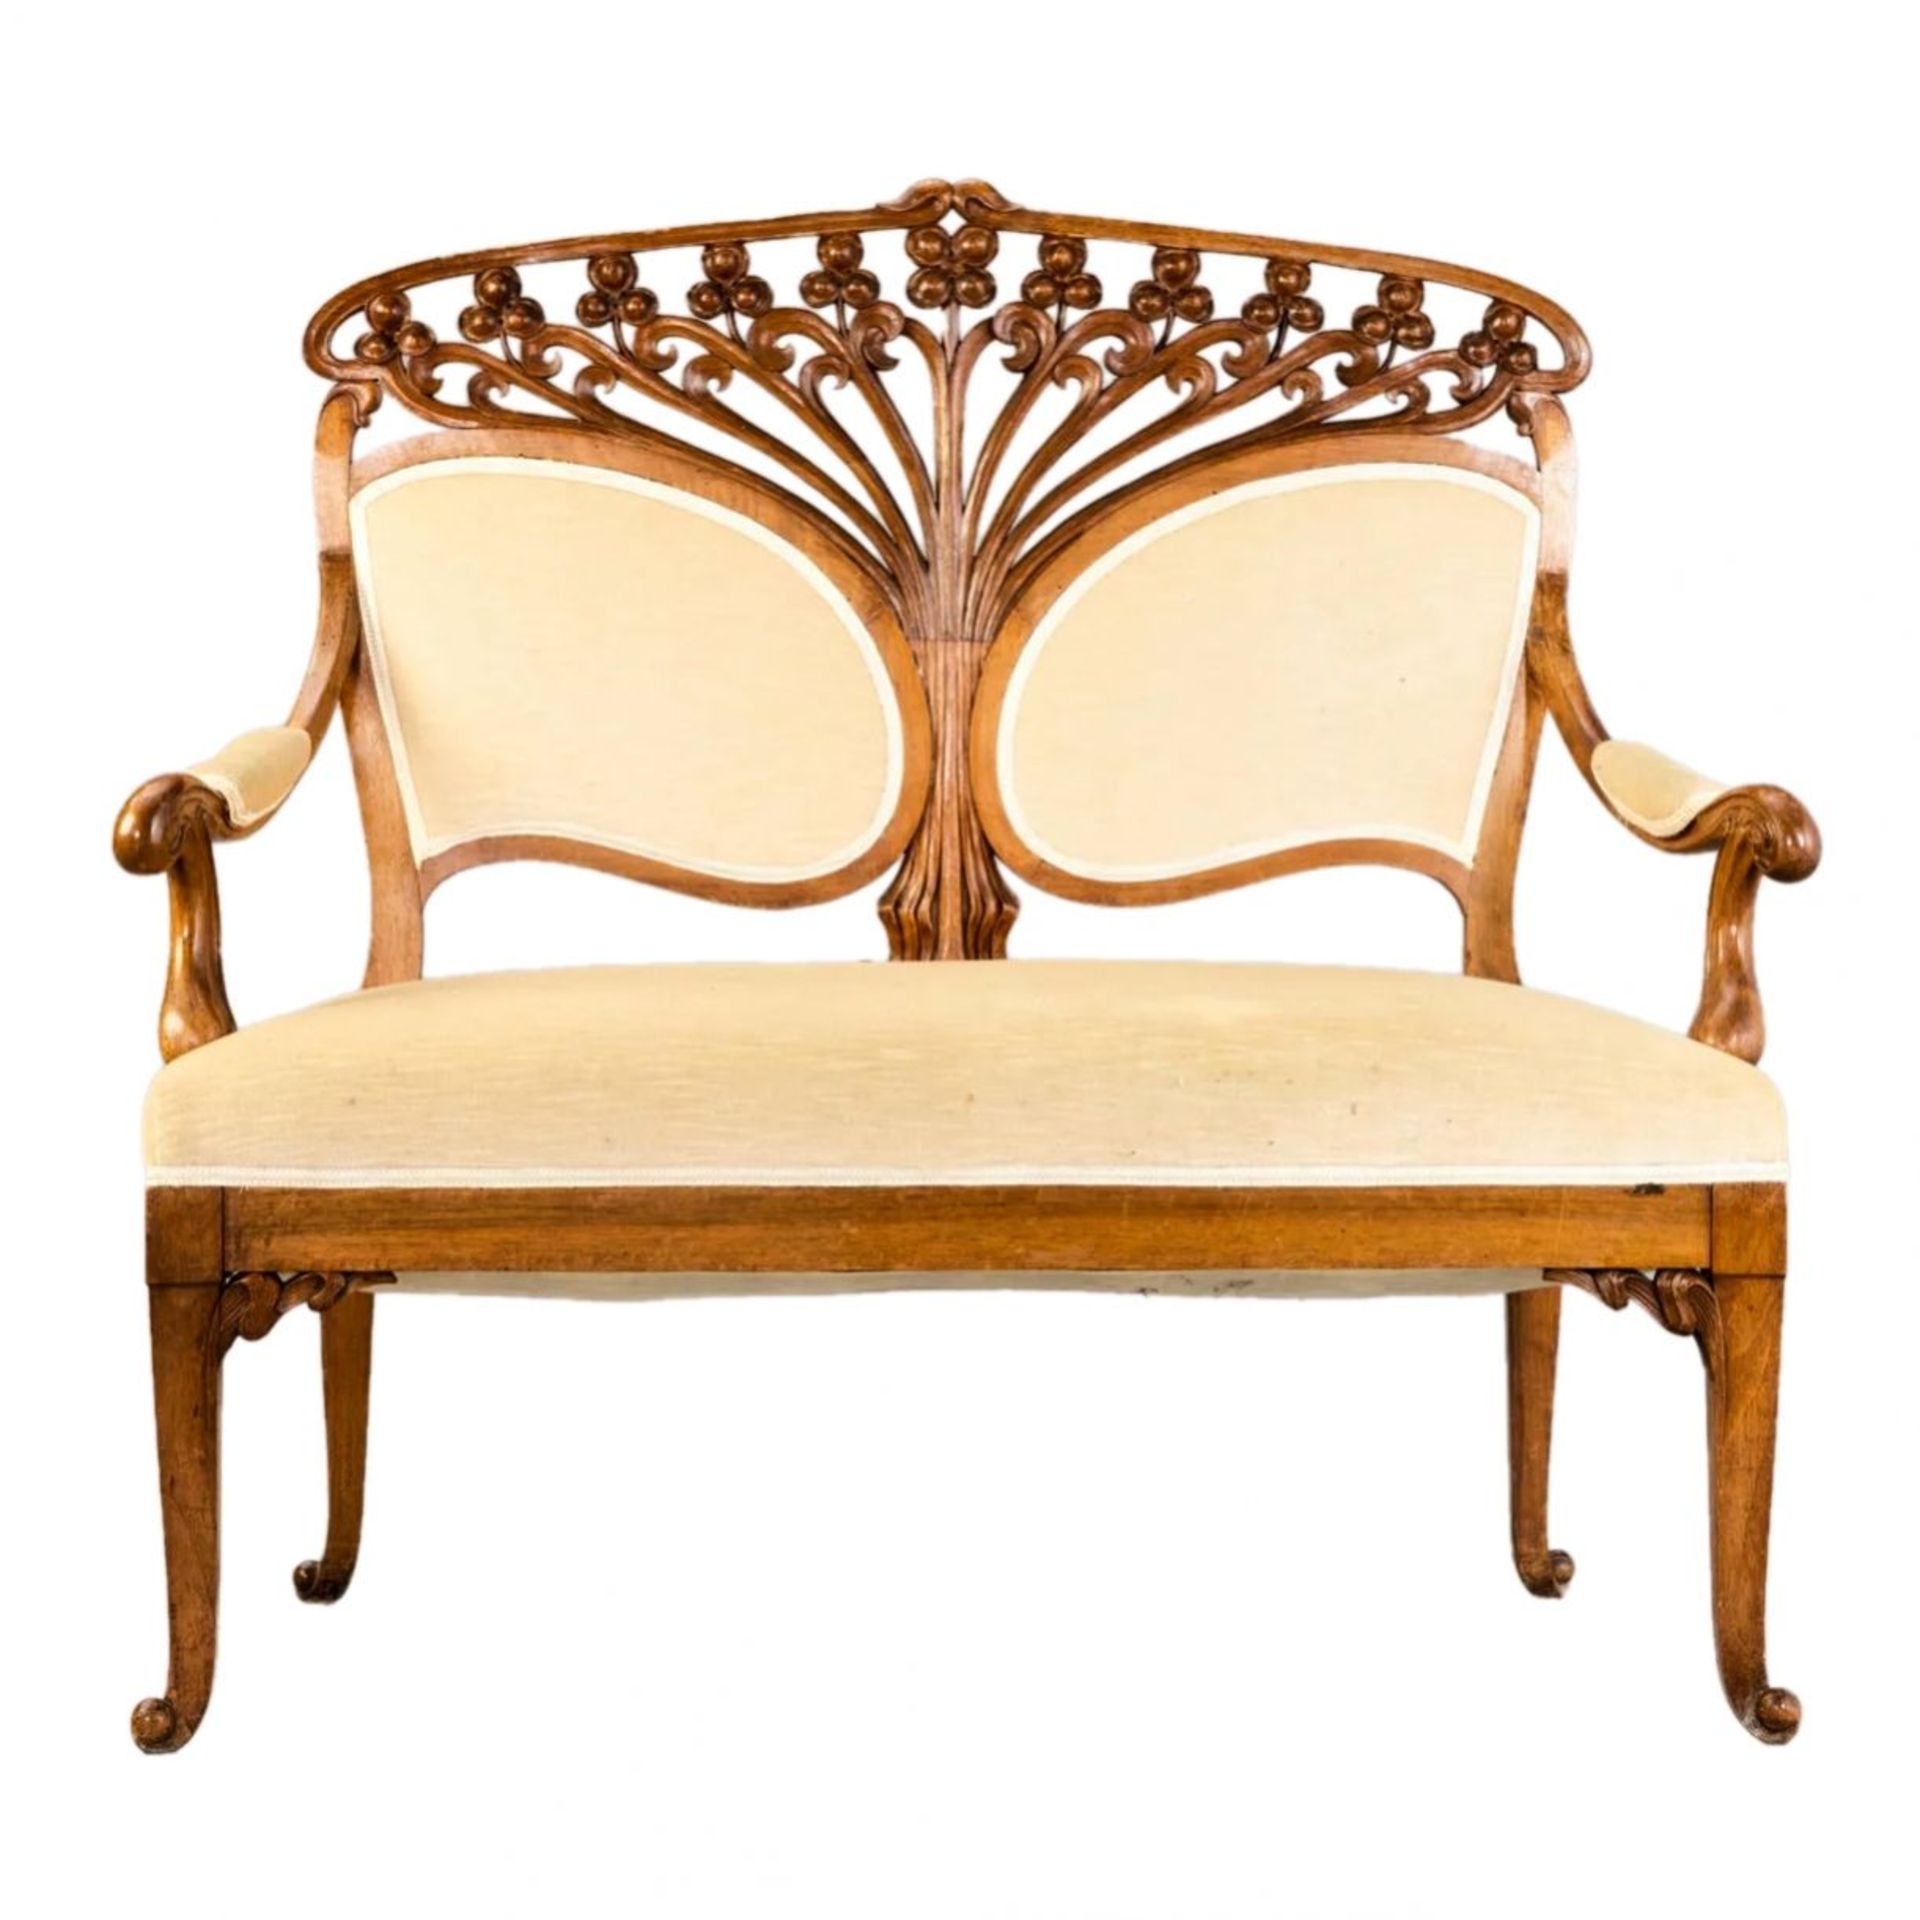 Furniture set in Art Nouveau style. France. 1905 - Image 3 of 13